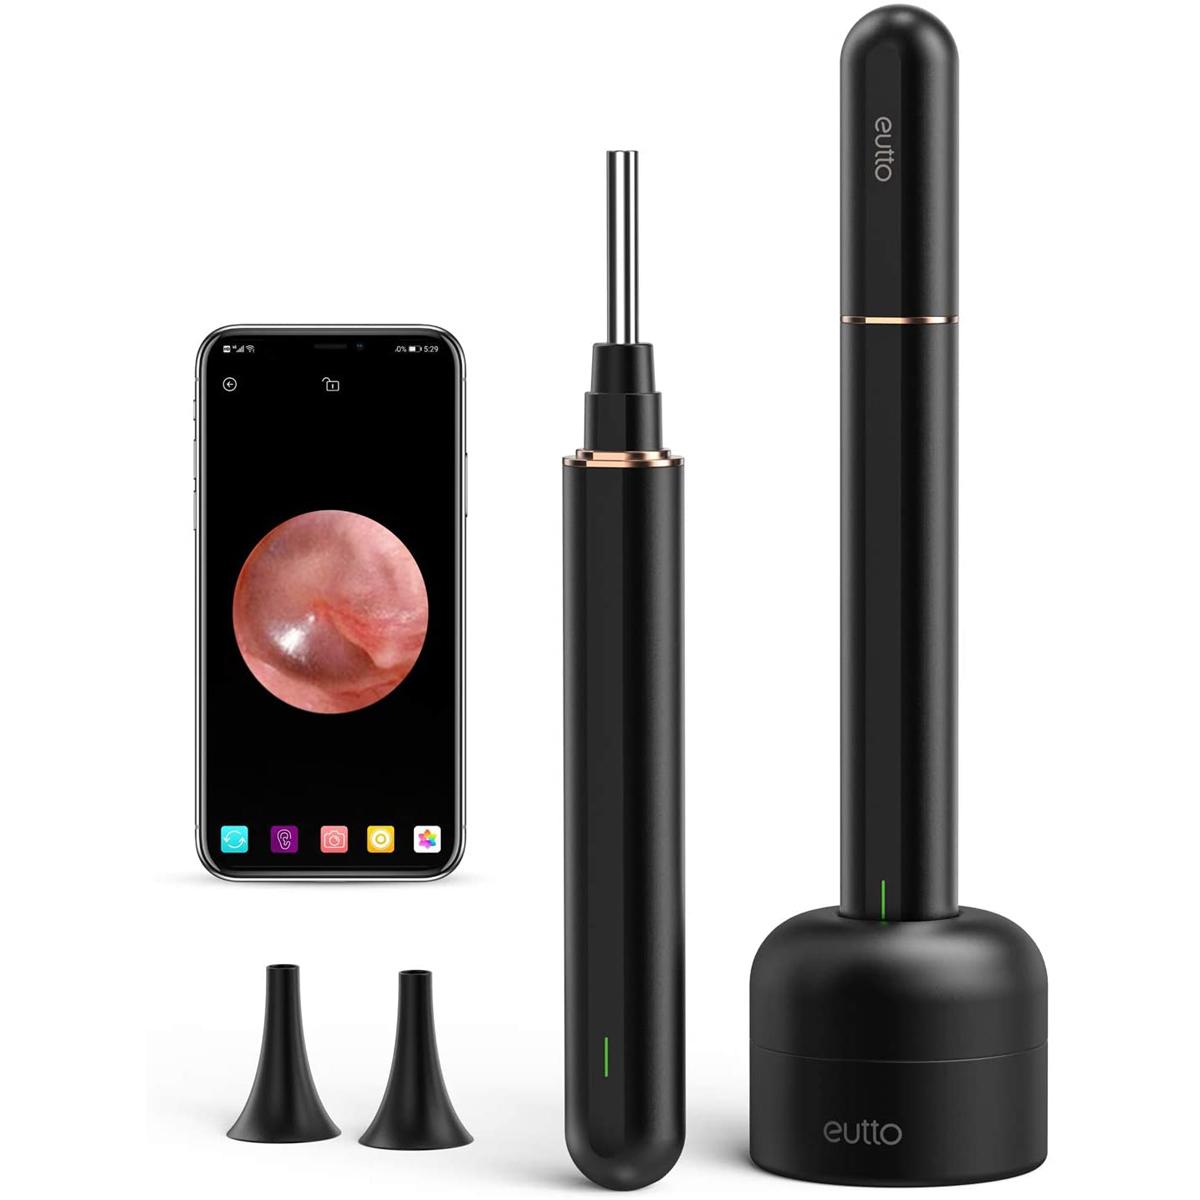 eutto WiFi Otoscope with Gyroscope and Earwax Removal Tool for $15.75 Shipped